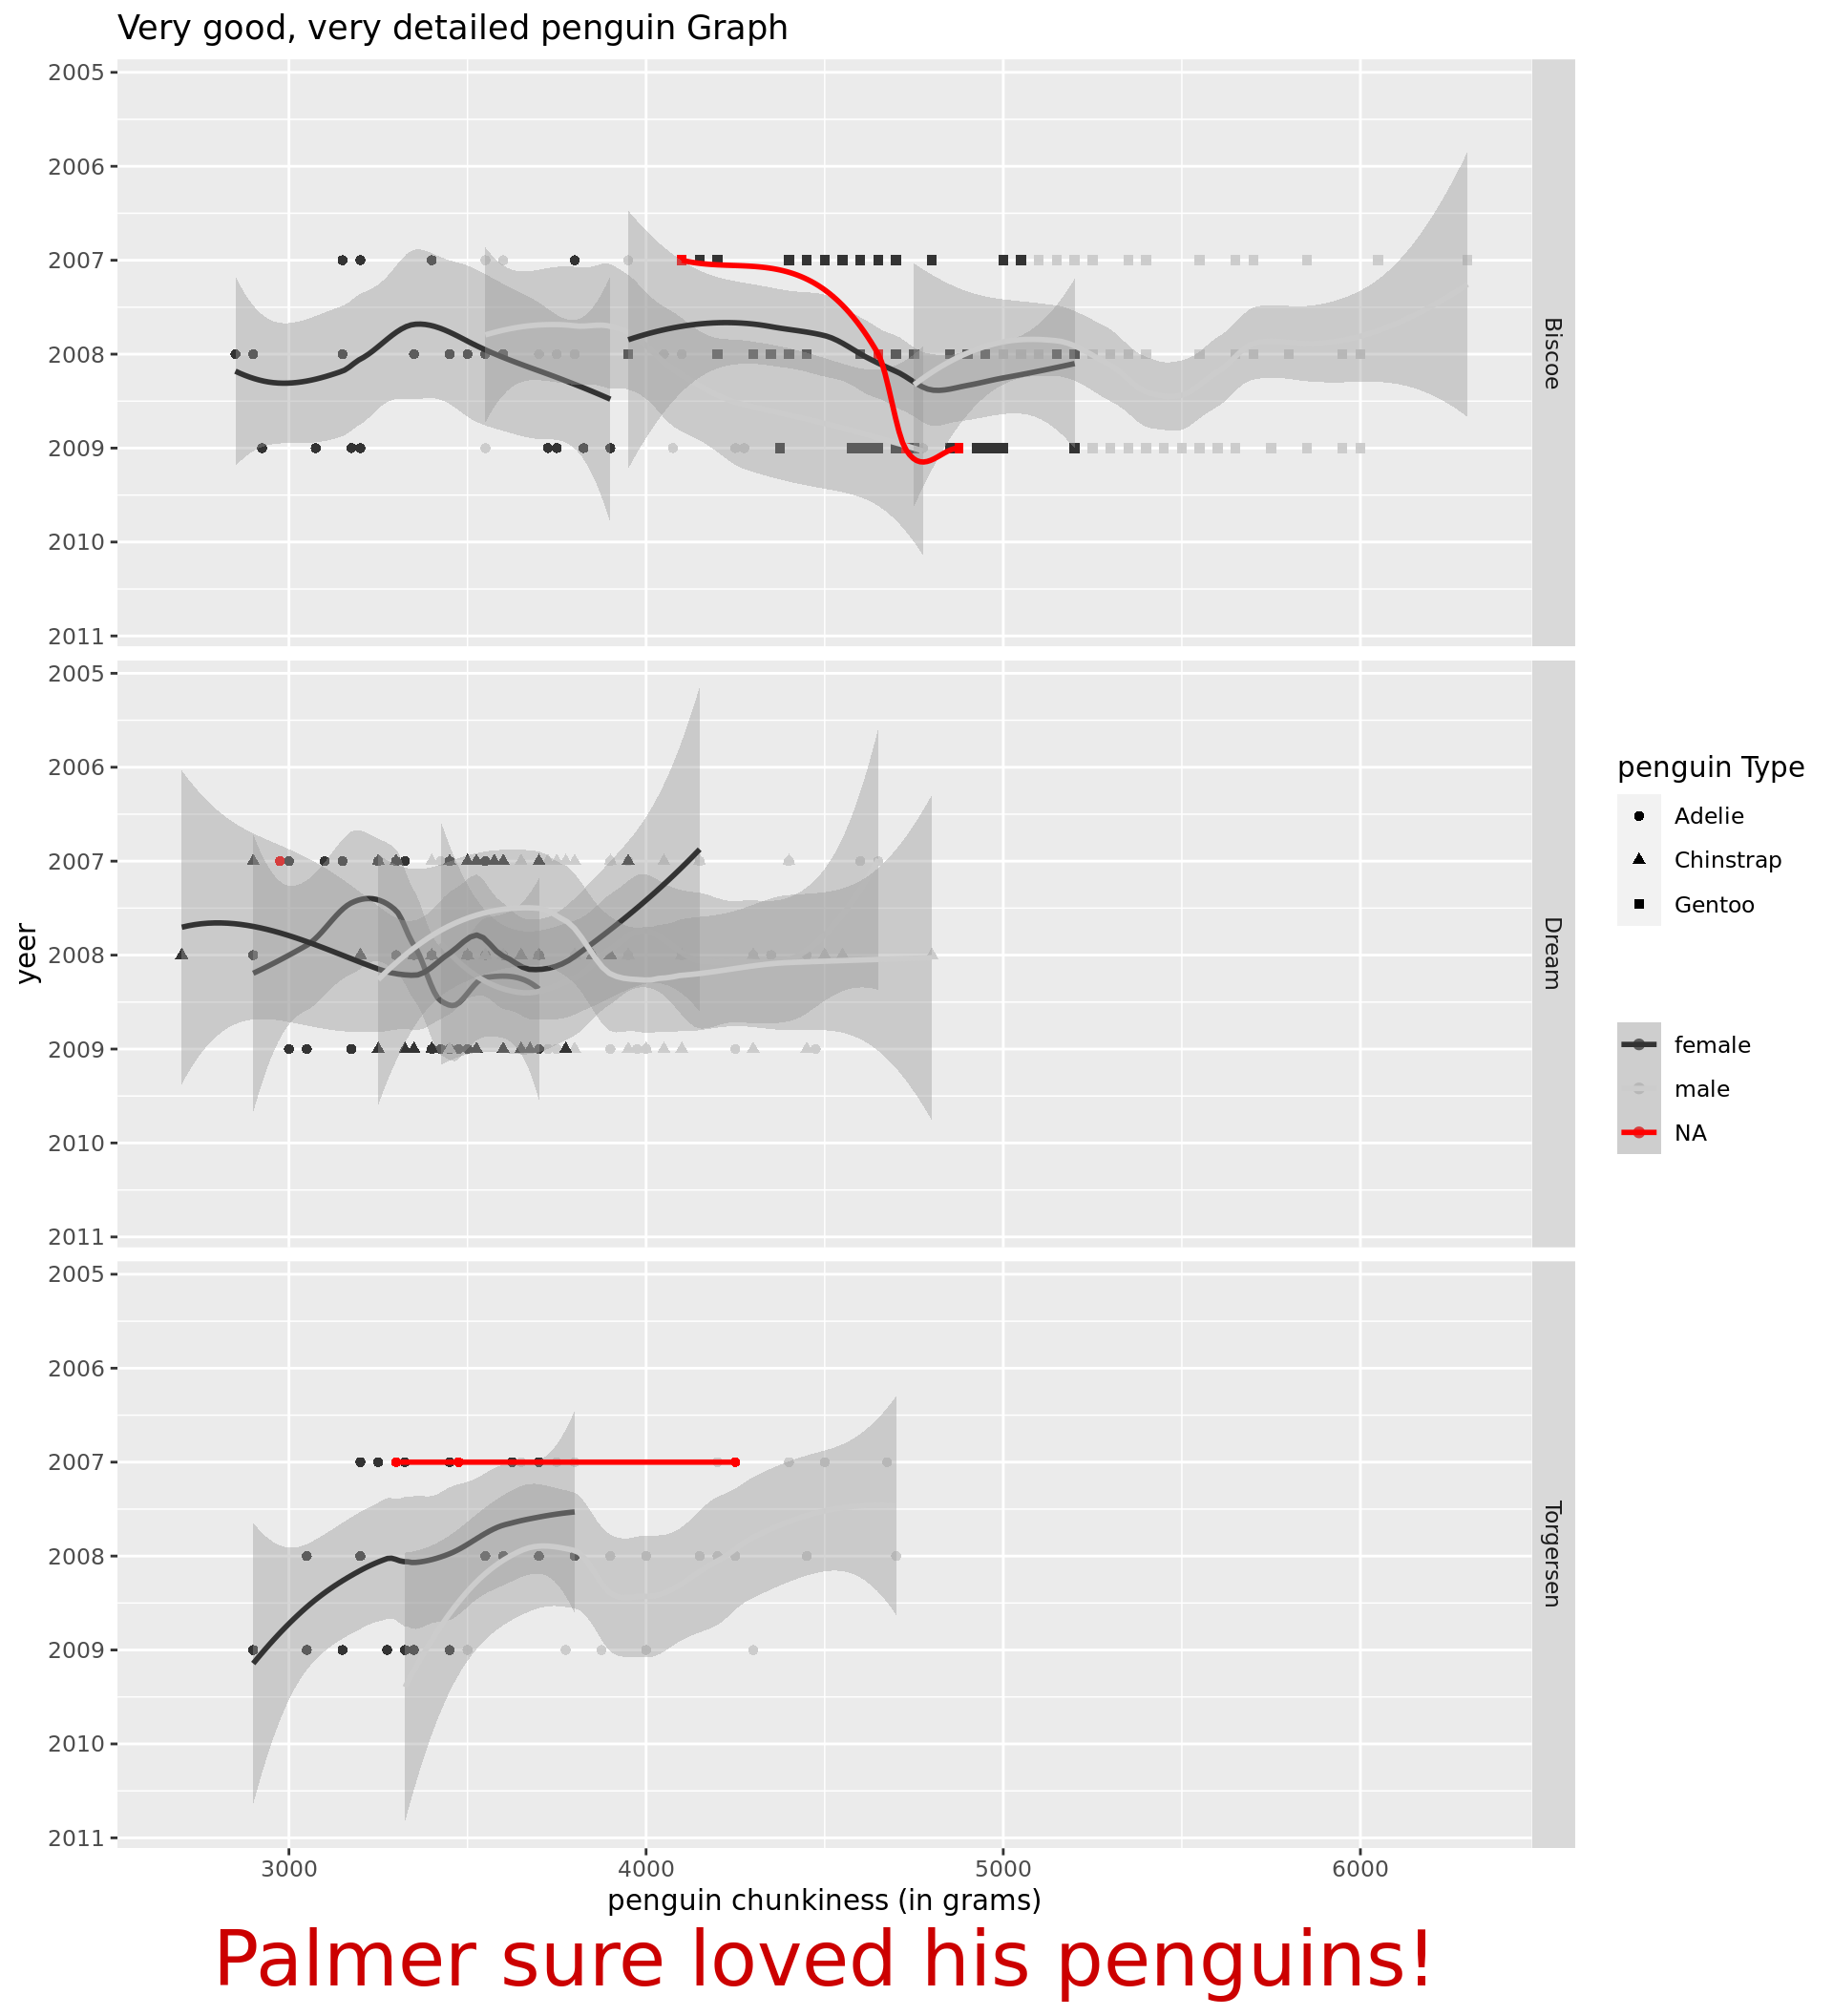 Ugly plots created with ggplot2.